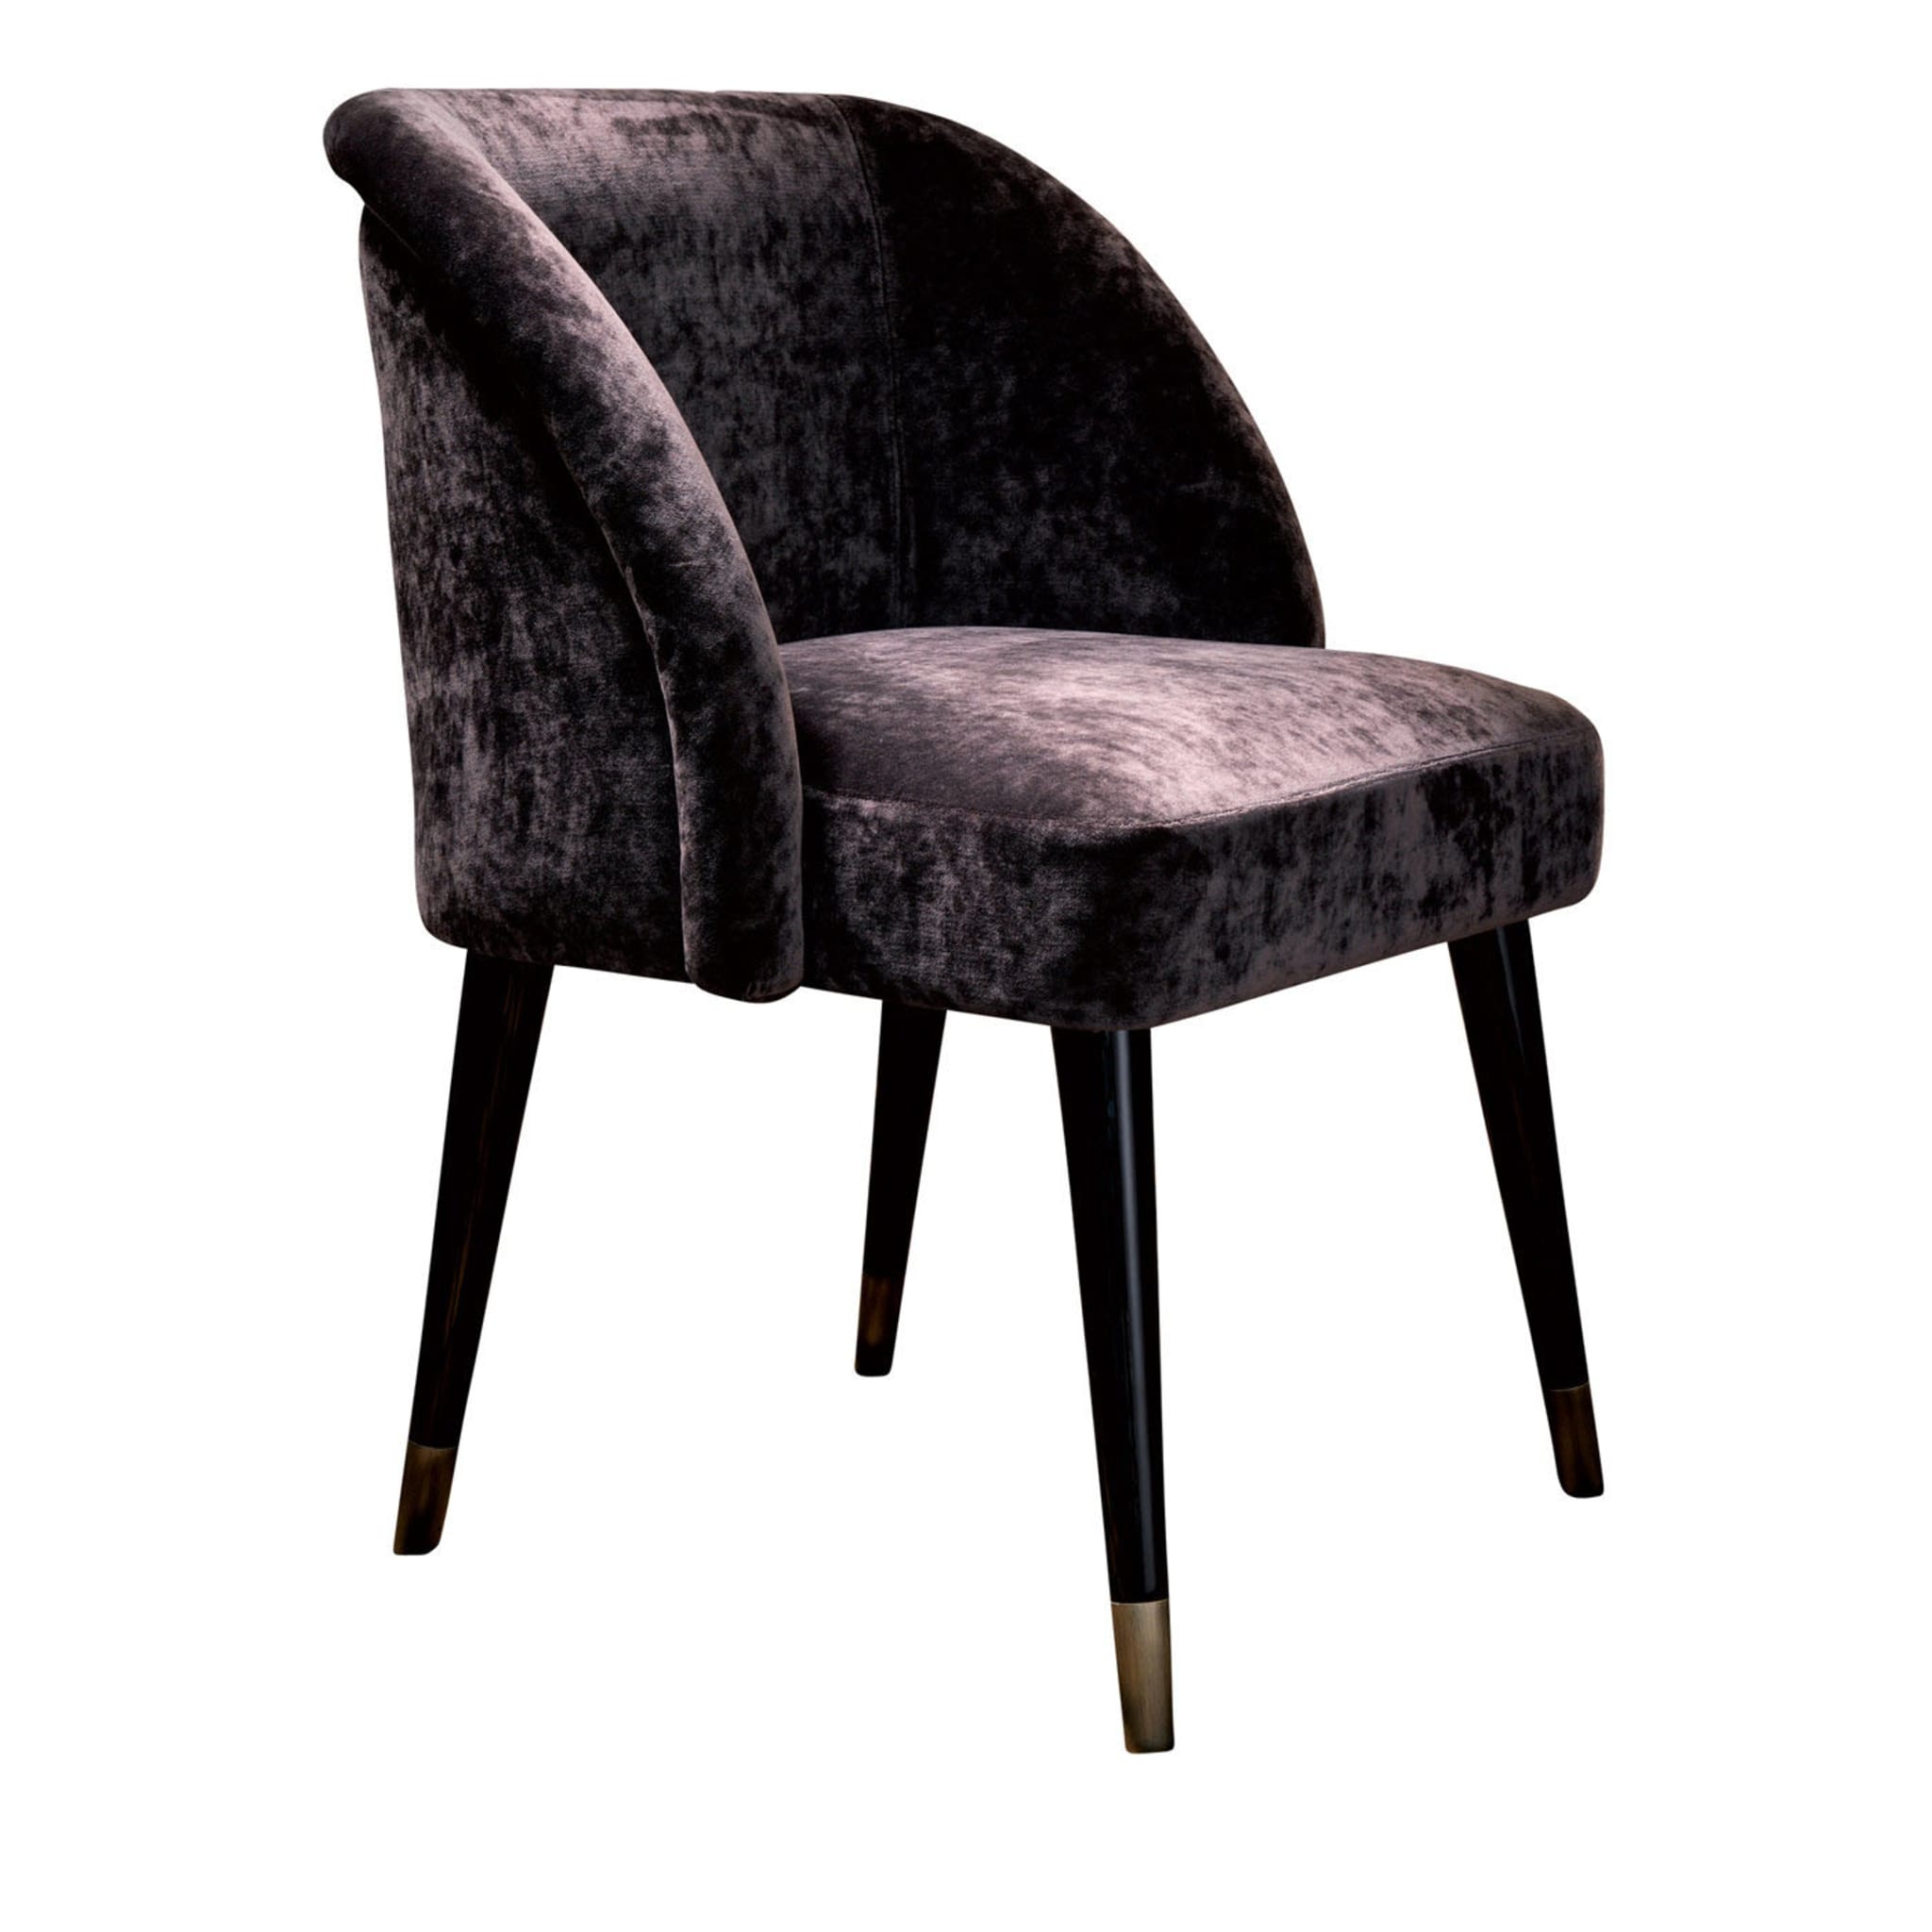 Pauline Brown Dining Chair - Main view